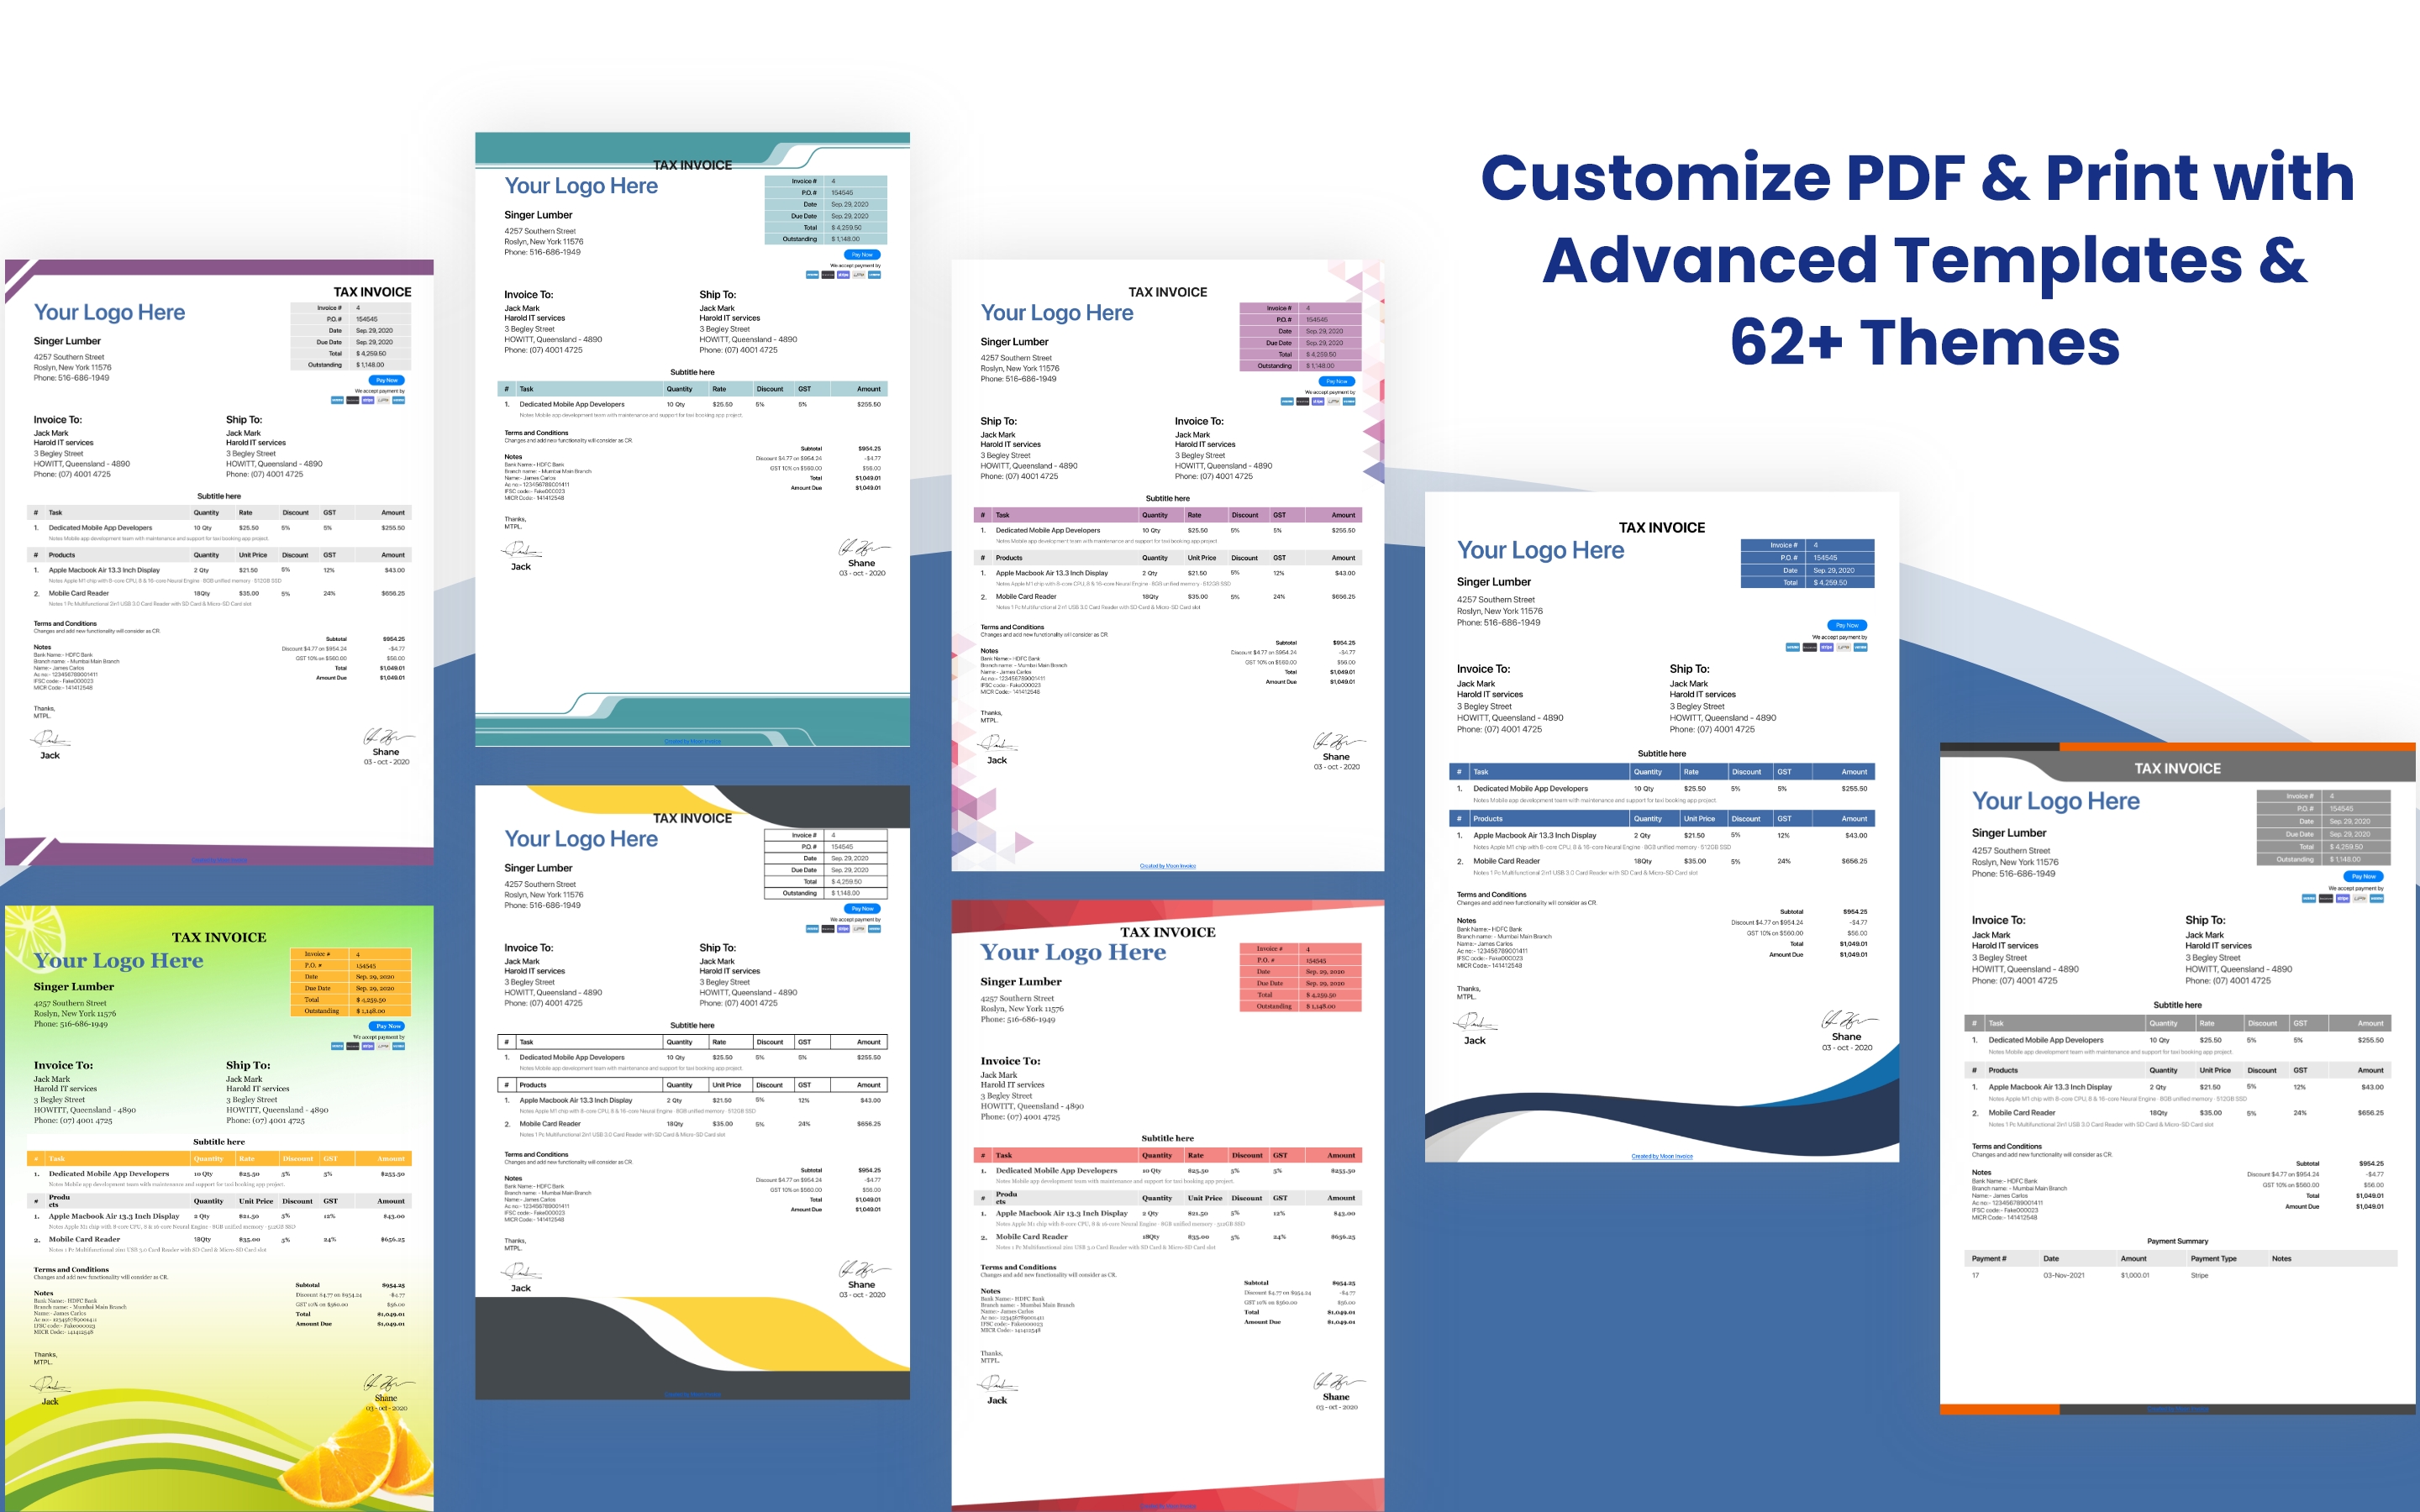 Customize PDF & Print with Advanced Templates & 62+ Themes